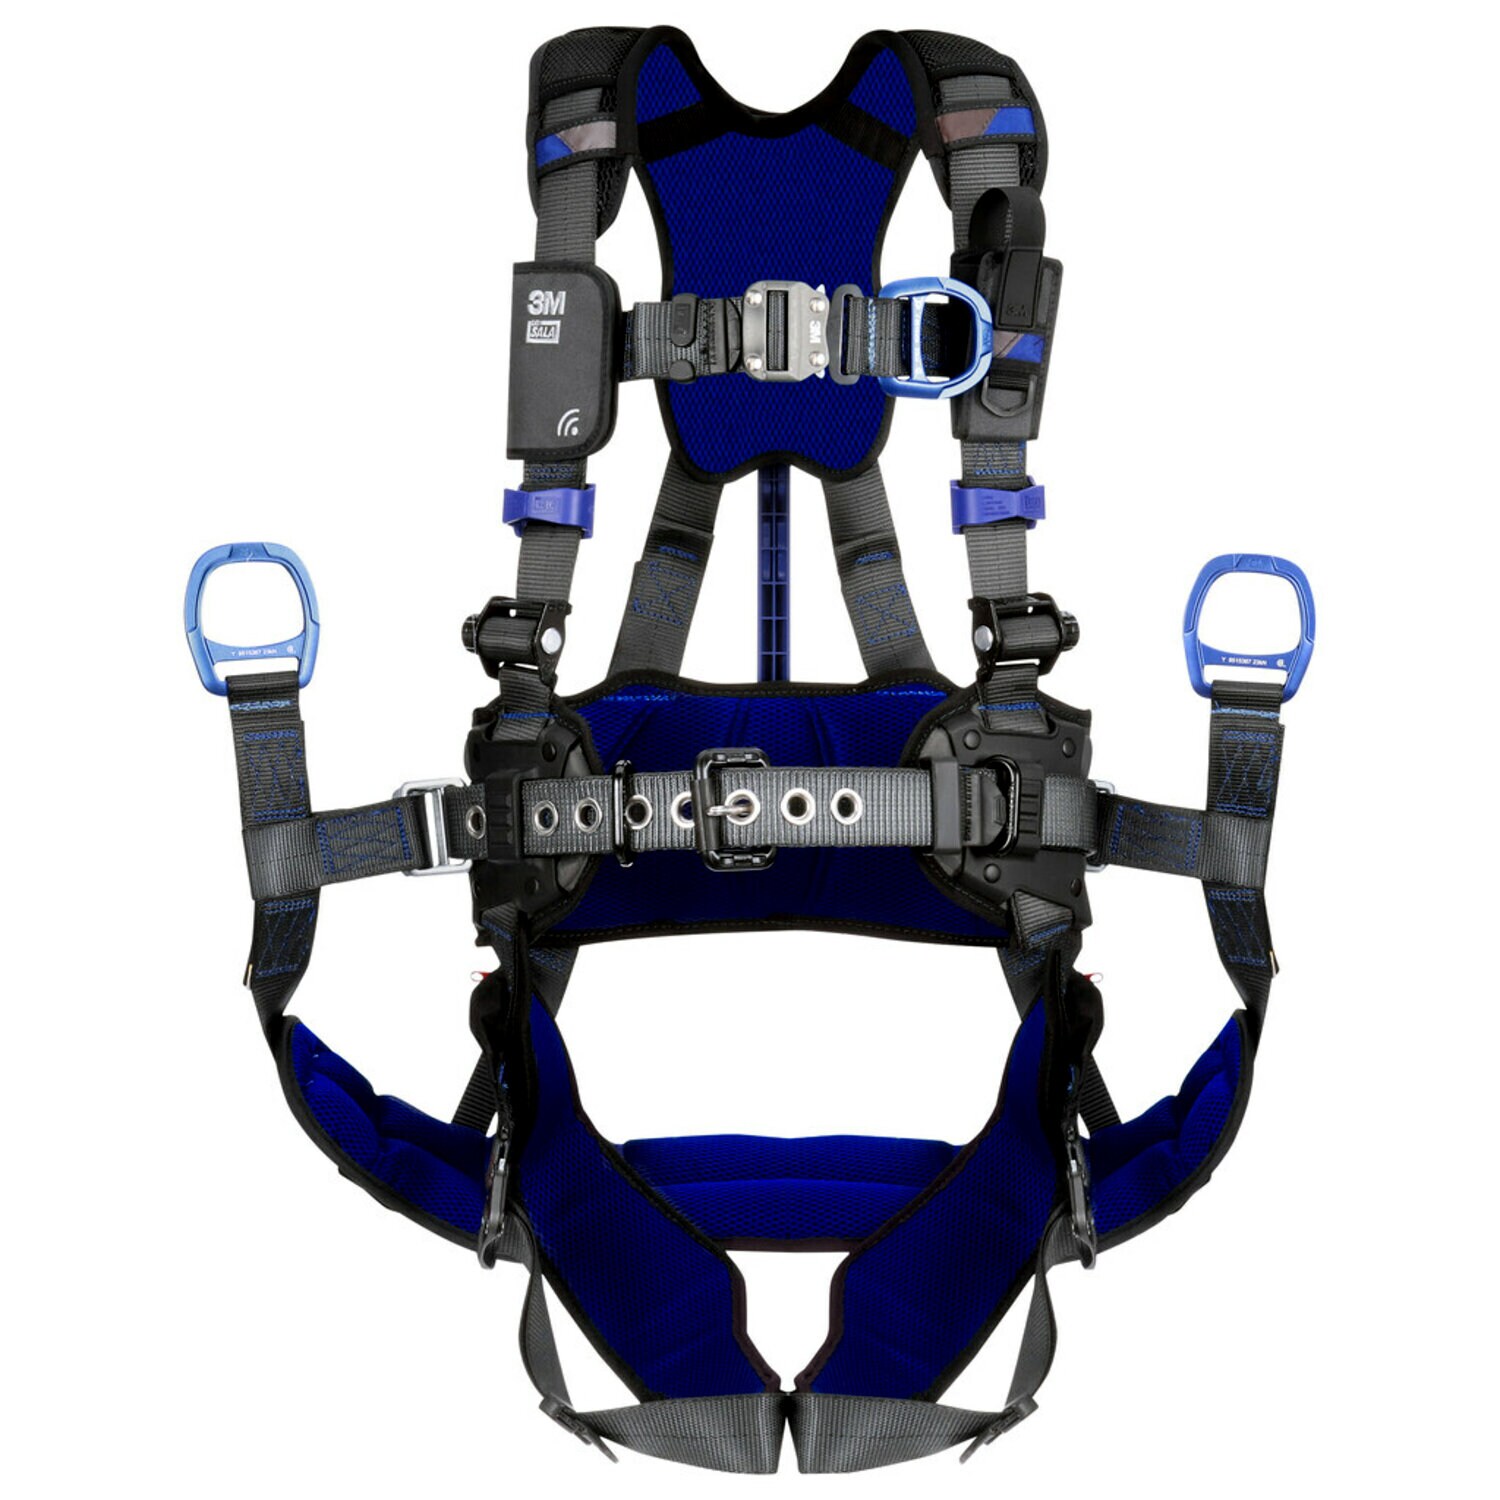 7012818055 - 3M DBI-SALA ExoFit X300 Comfort Tower Climbing/Suspension Safety Harness with Weight Bar 1403232, Small